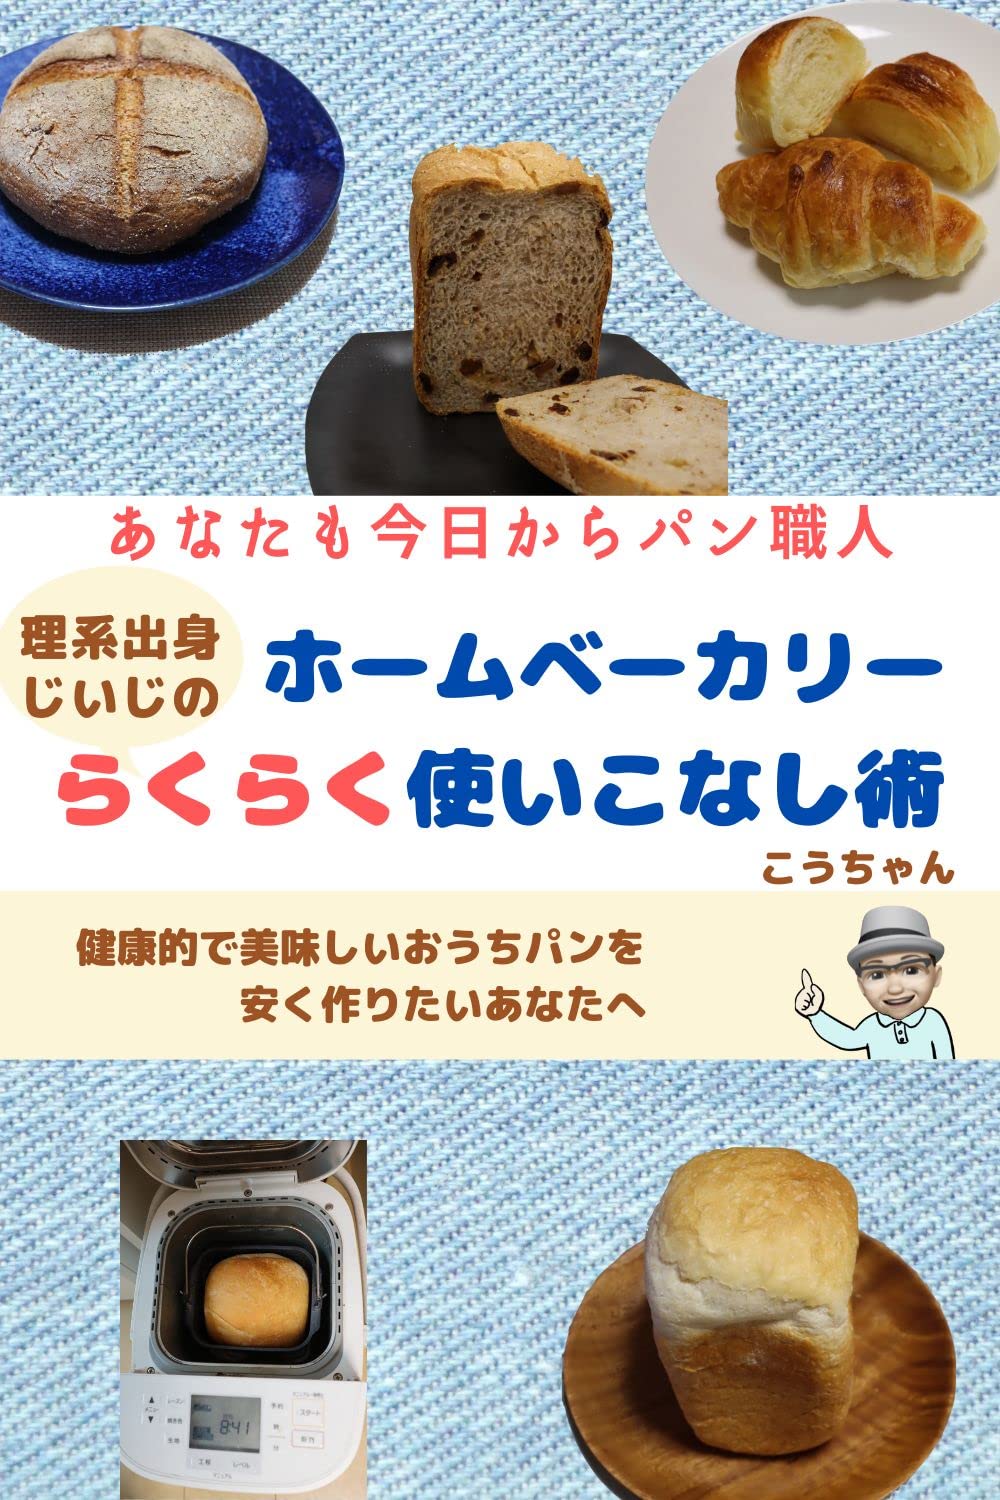 How to make good use of a breadmaker: You can become a bread artisan from today Making good use of breadmaker (Japanese Edition)